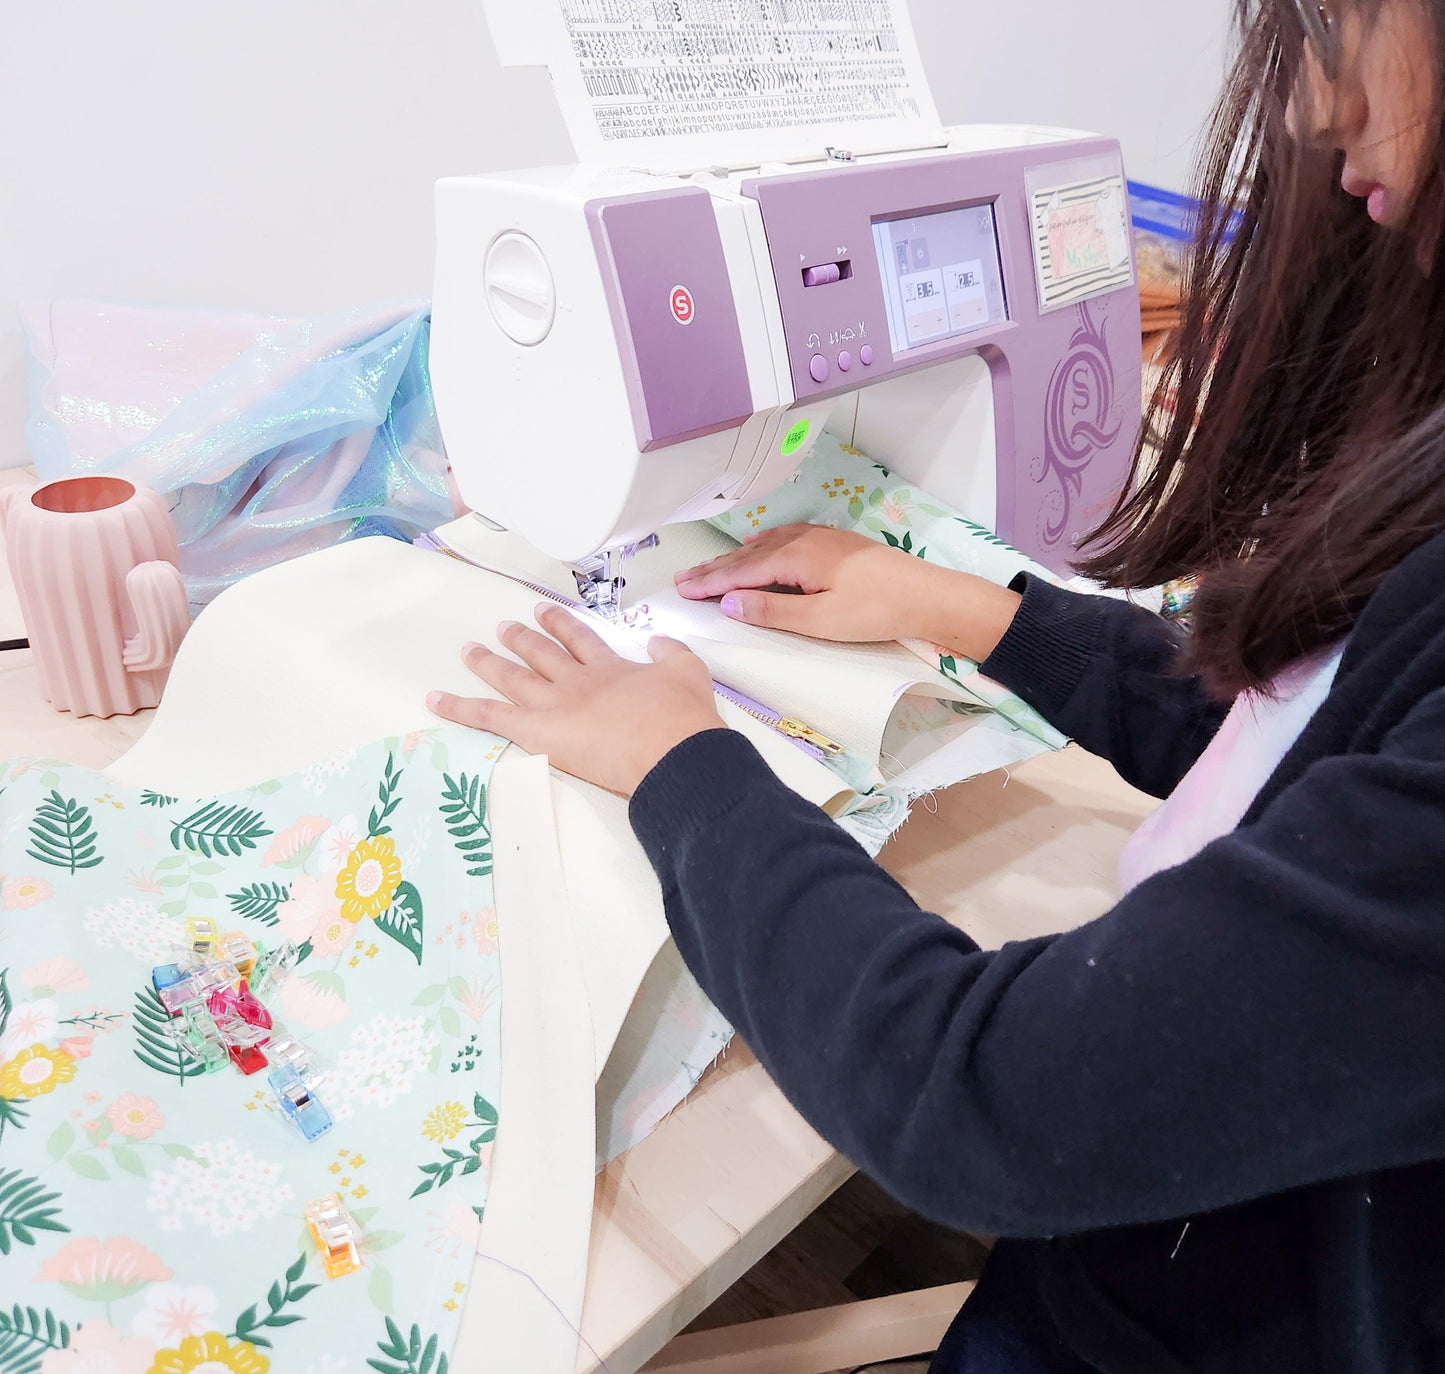 Friday Private Fashion Design & Sewing Course Jan-Mar - The Fashion Class